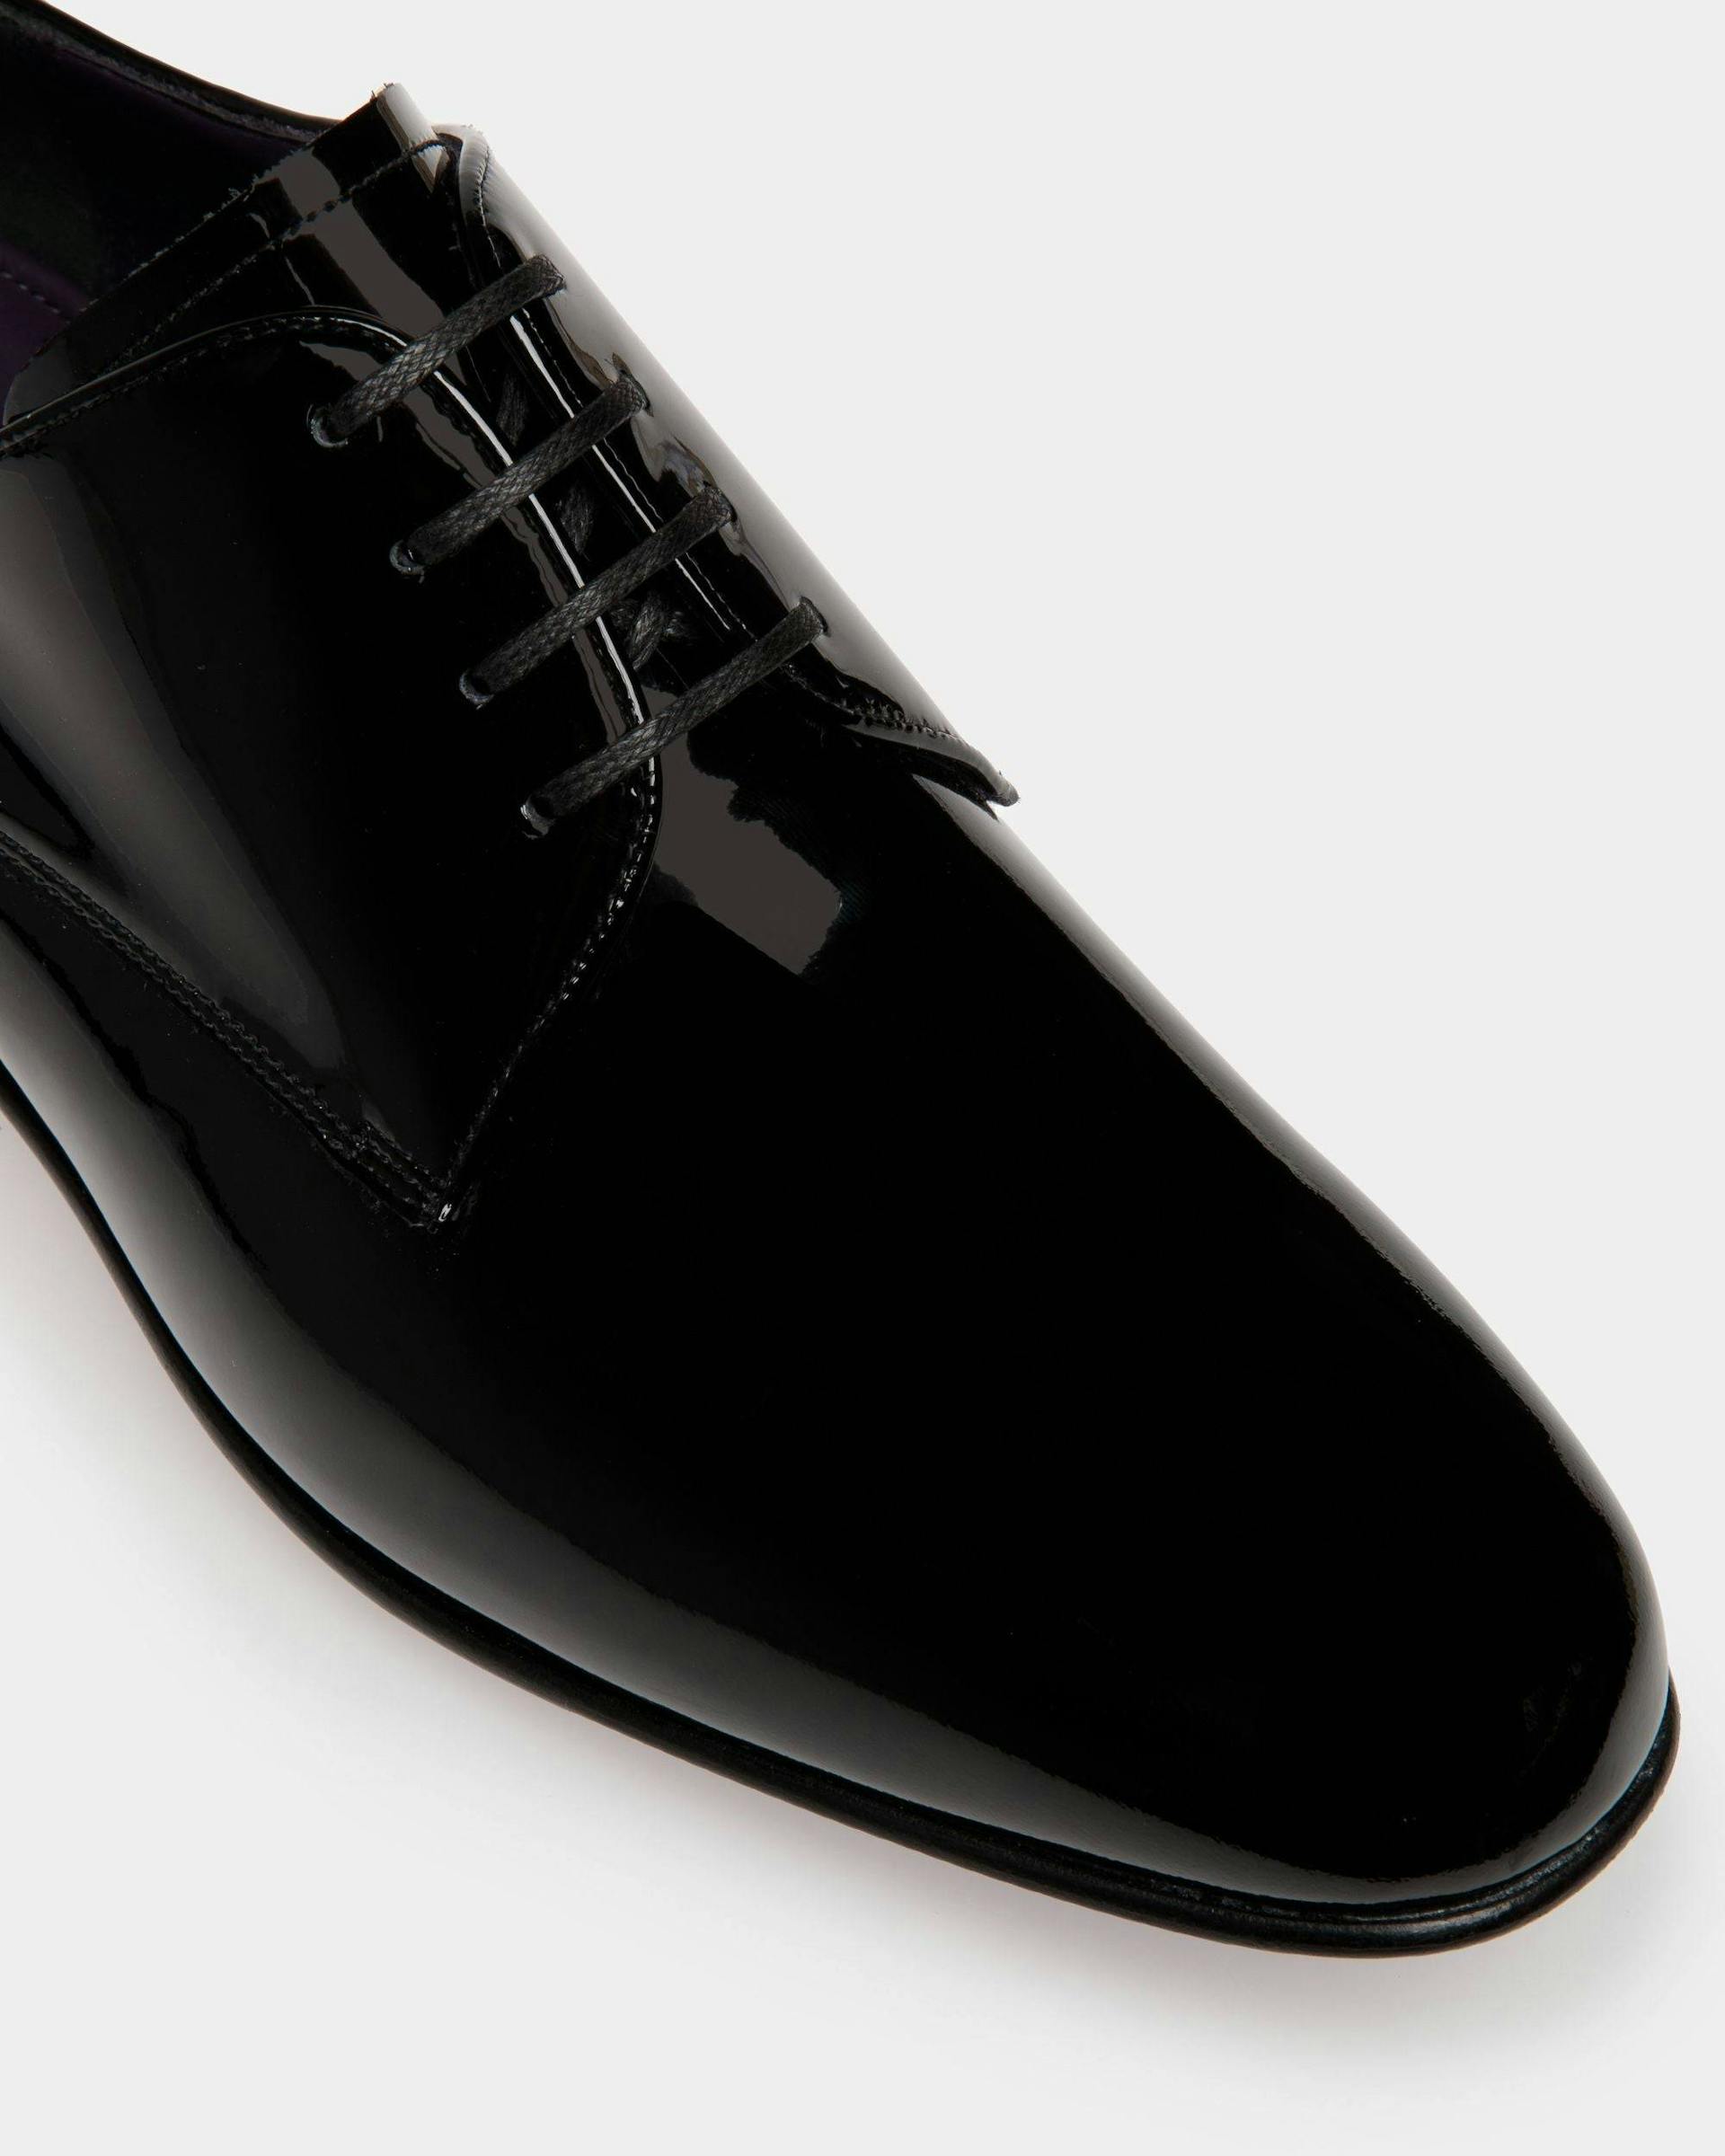 Suisse Derby in Black Patent Leather - Men's - Bally - 04